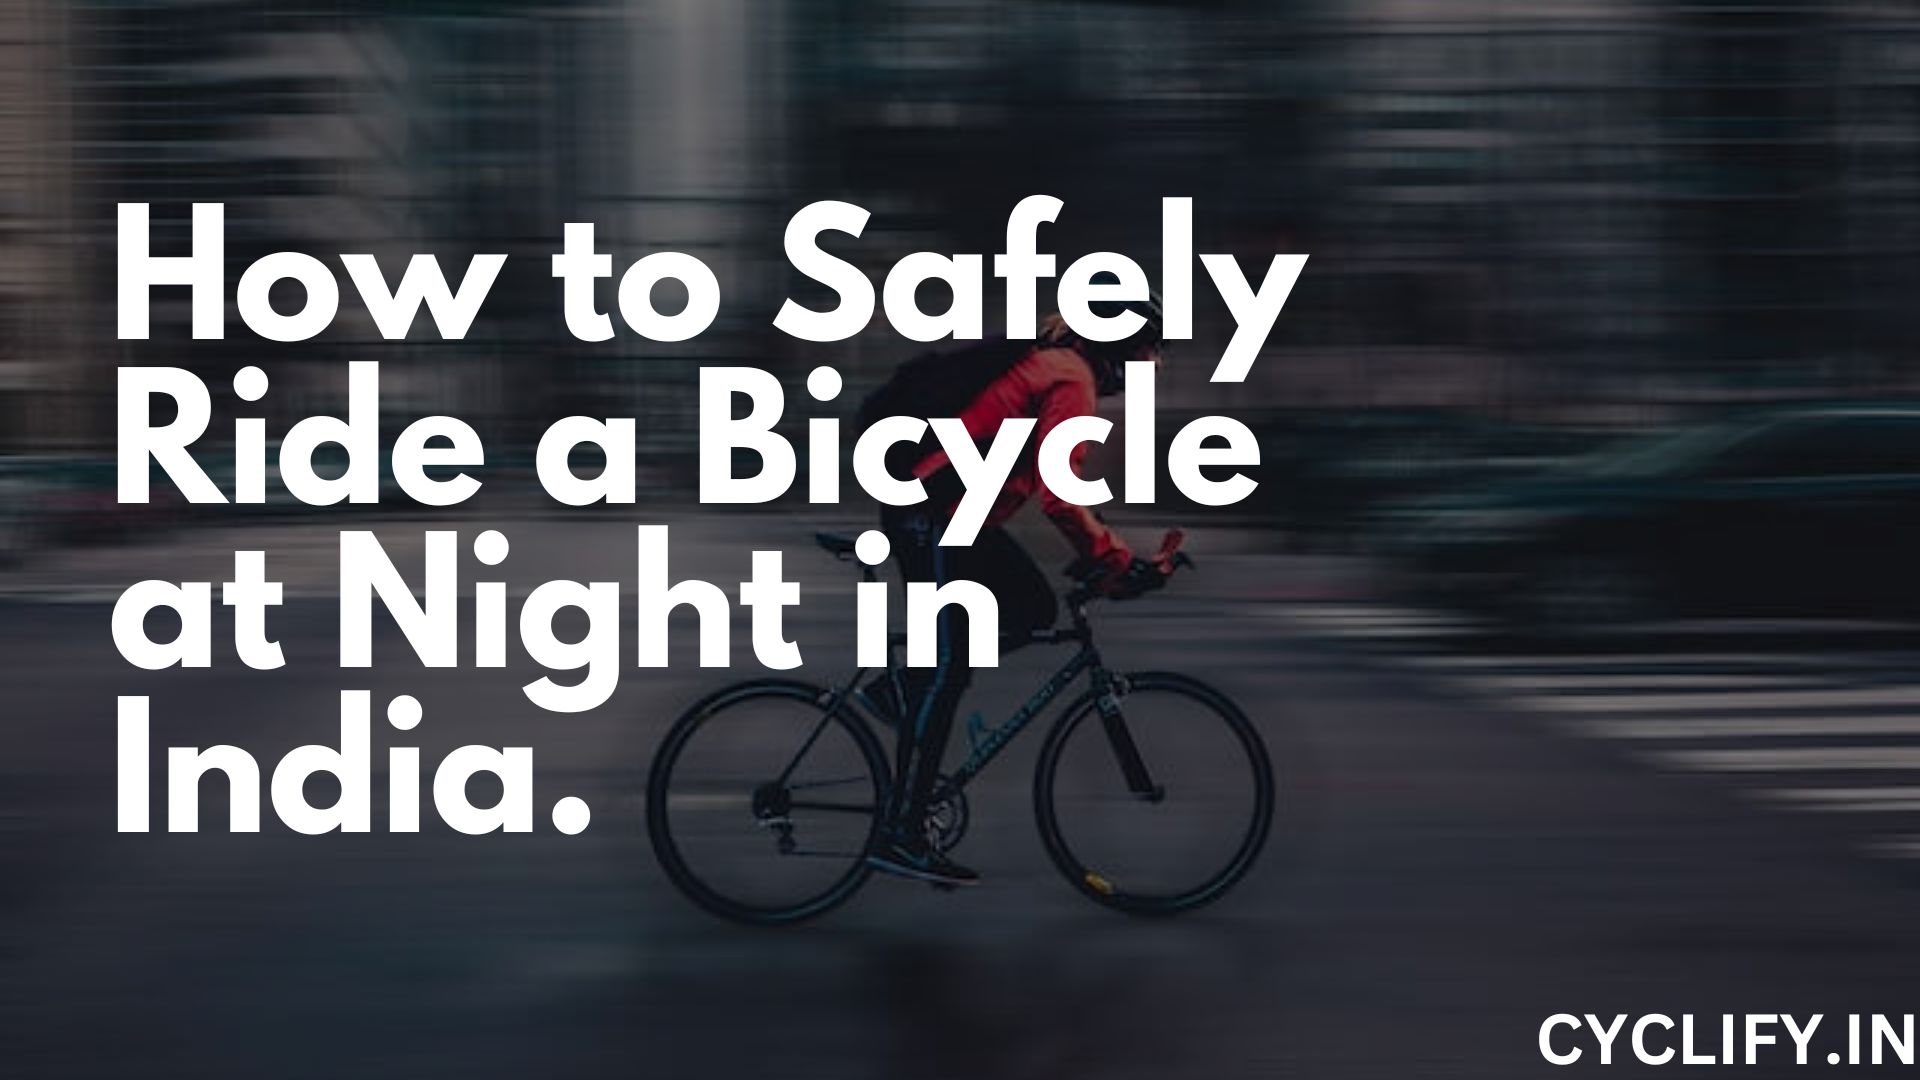 How to safely ride a bicycle at night in India